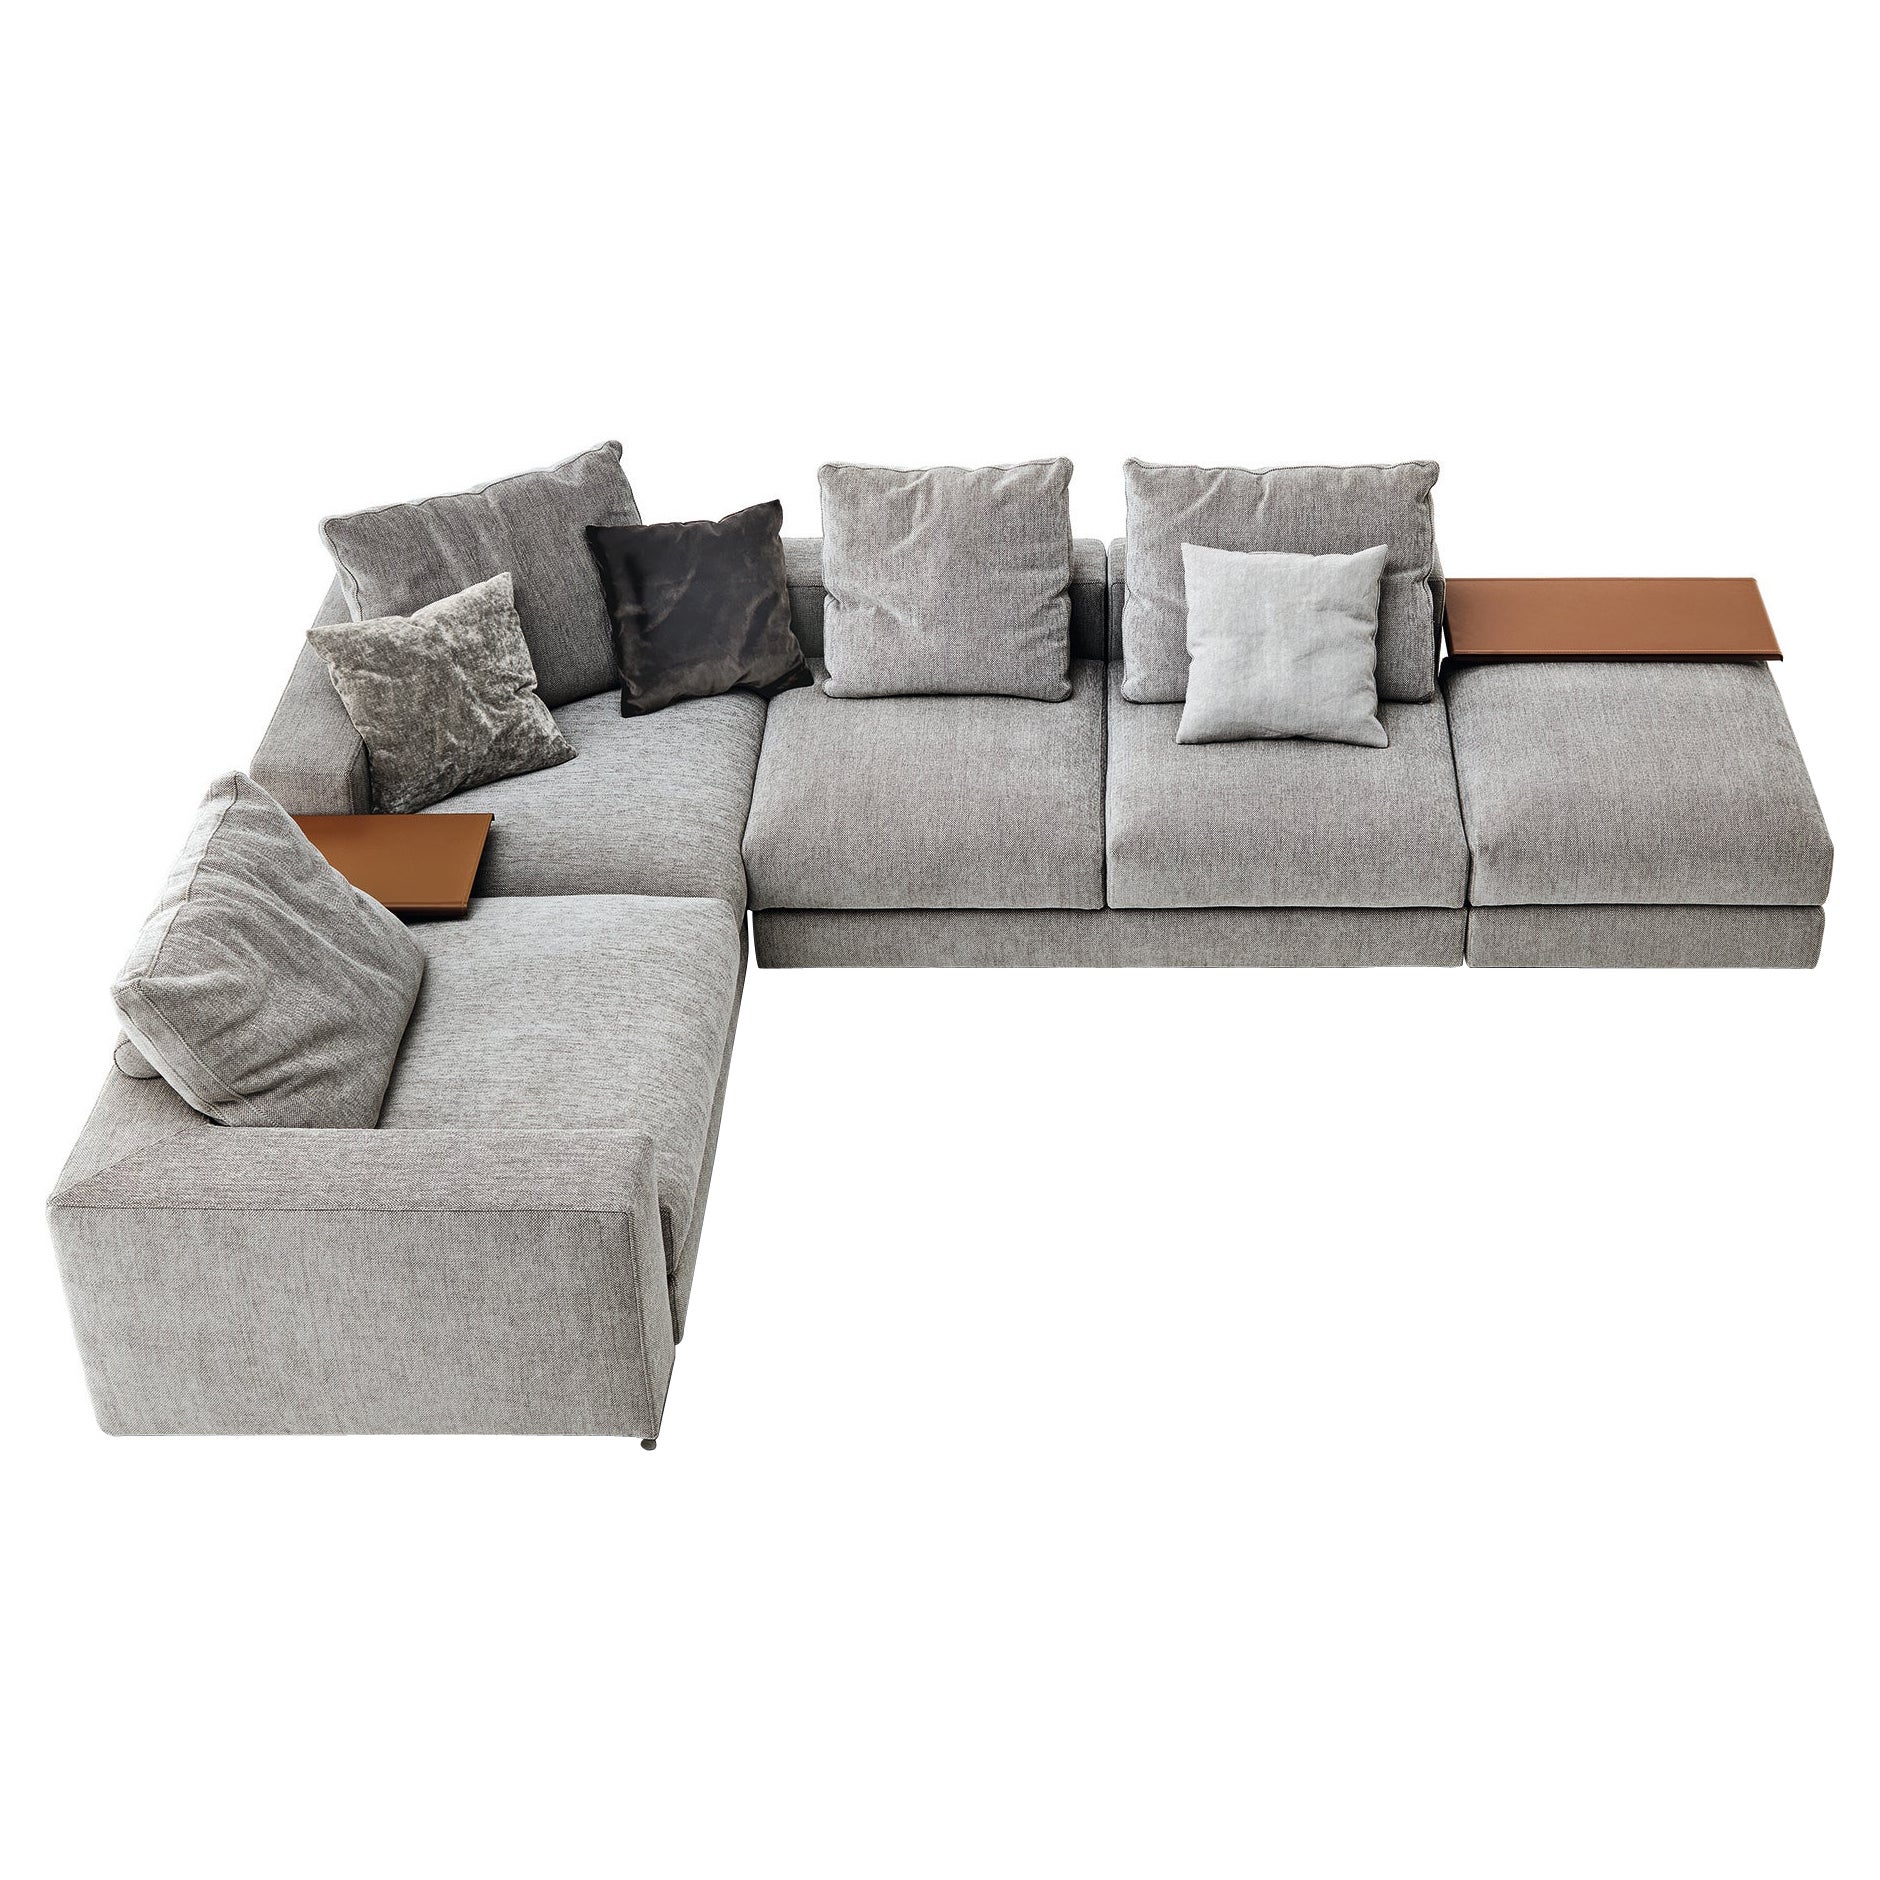 Ananta Class 15 Large Sofa in Lusso Upholstery and Black Nickel by Sergio Bicego For Sale